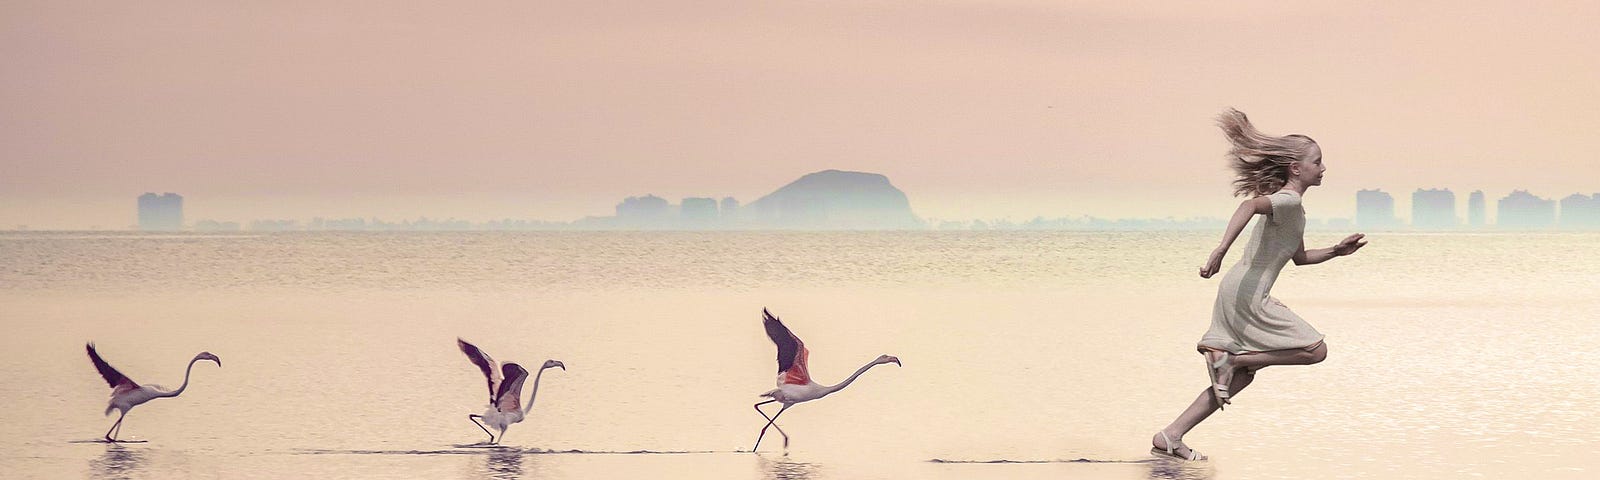 Girl in simple dress running on rippling water followed by three small flamingos running after her. Soft hazy outcroppings in the distant. Their shadows on the water. All colors pastels…